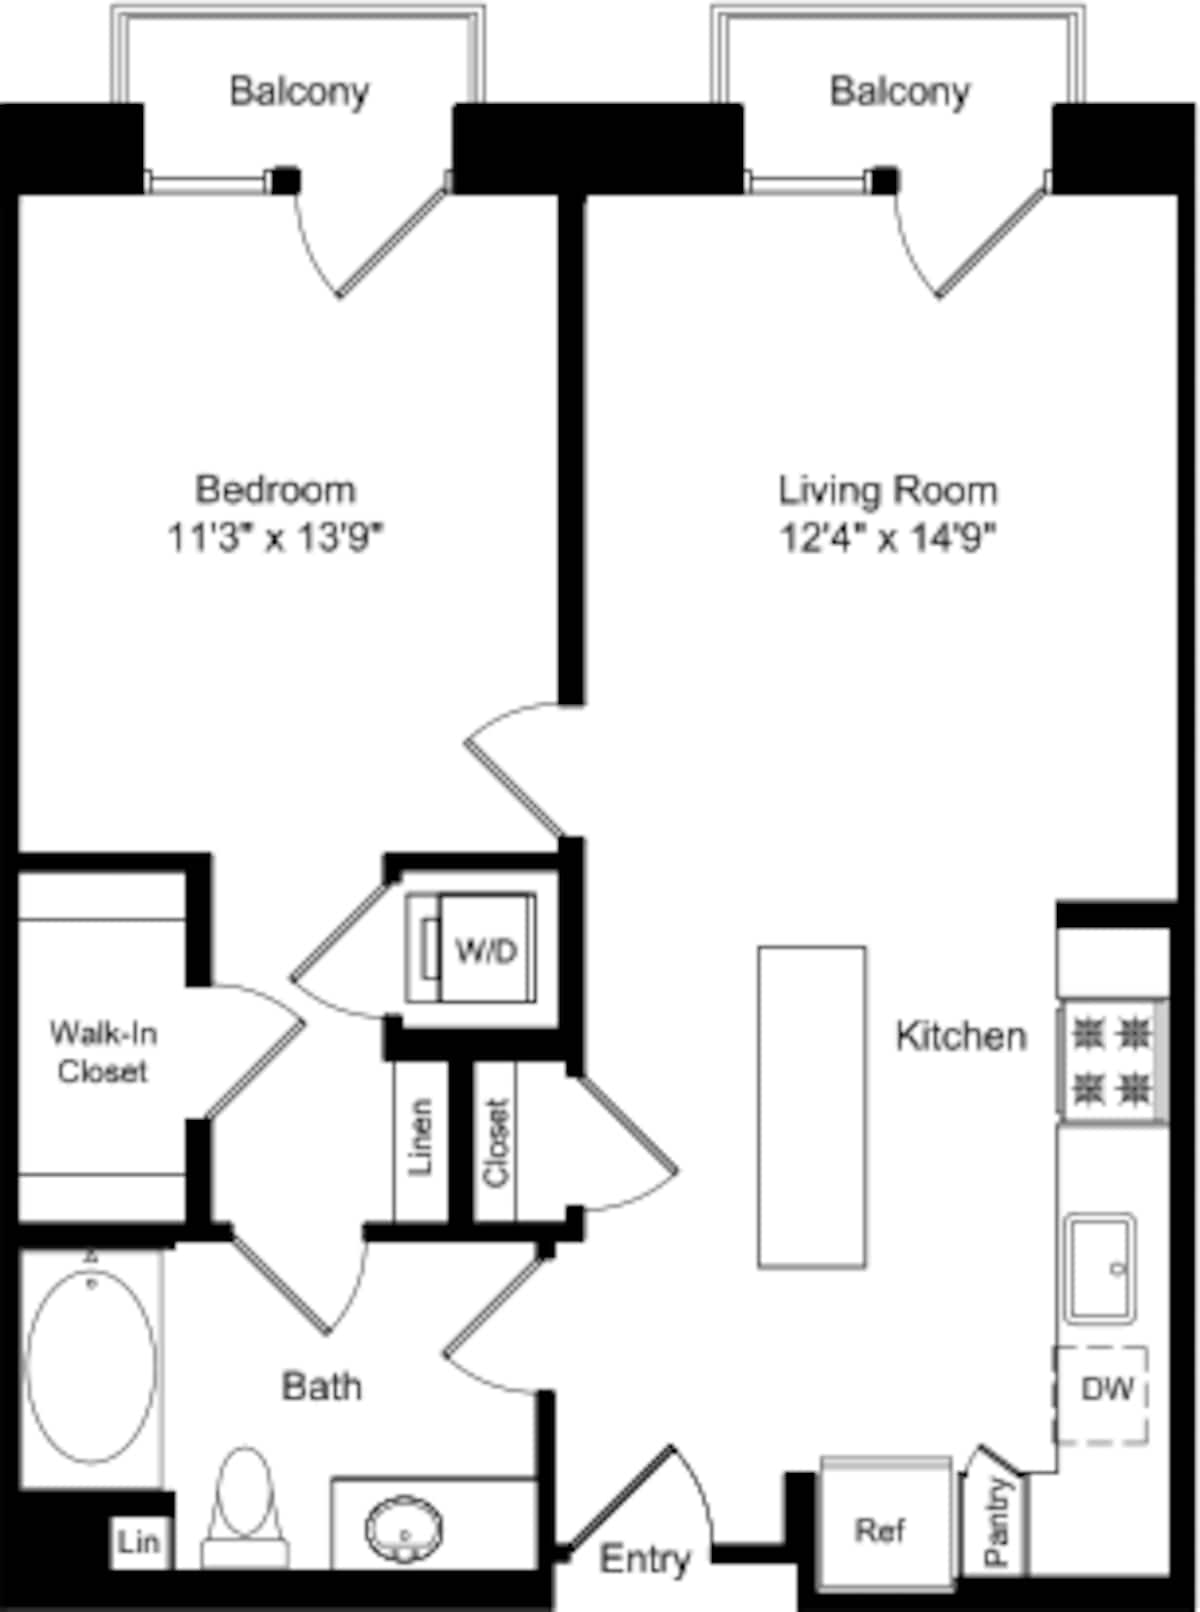 Floorplan diagram for One Bed A1 with Balconies, showing 1 bedroom